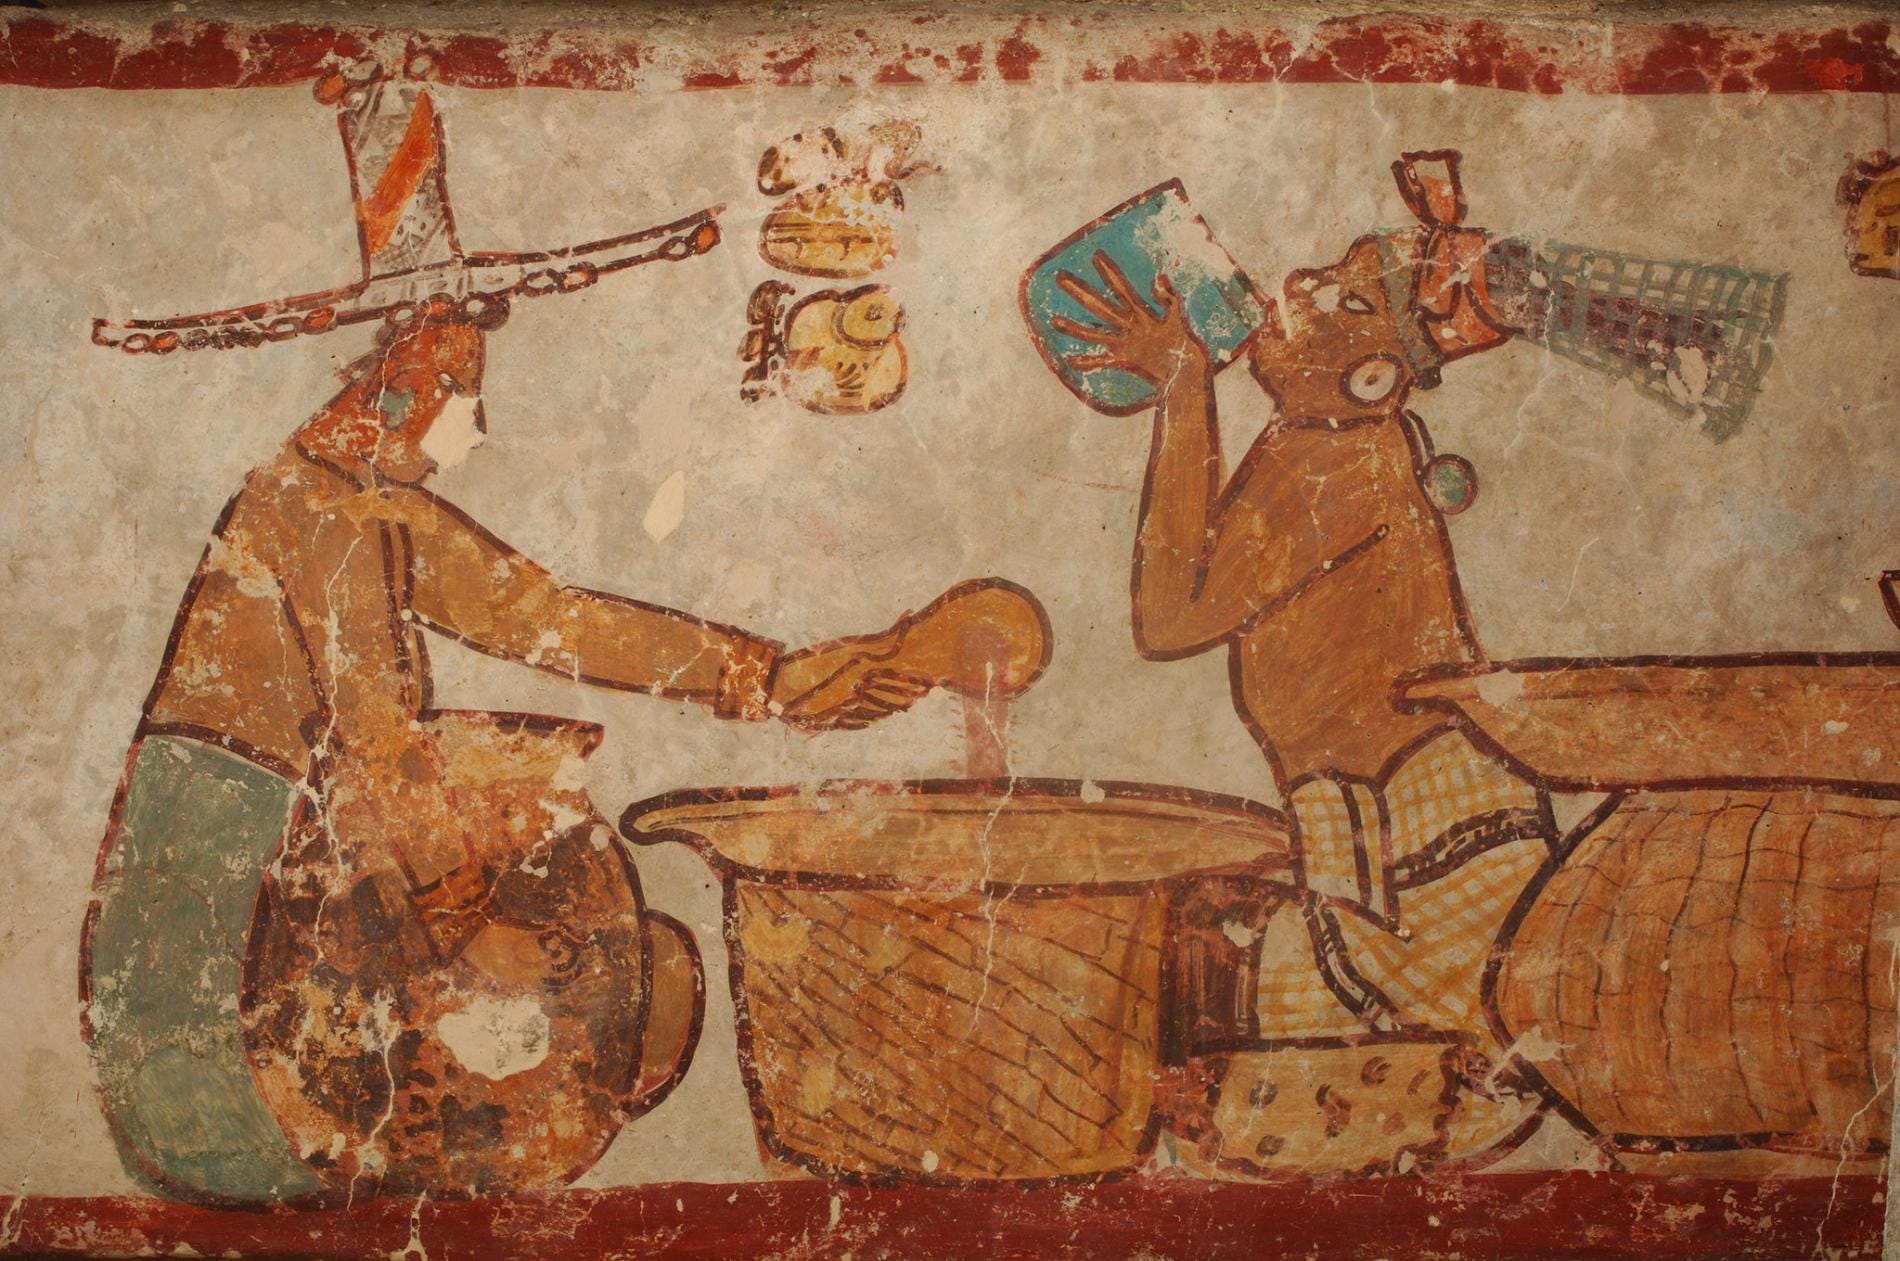 From the ancient Maya city of Calakmul depict the preparation and drinking of cacao.